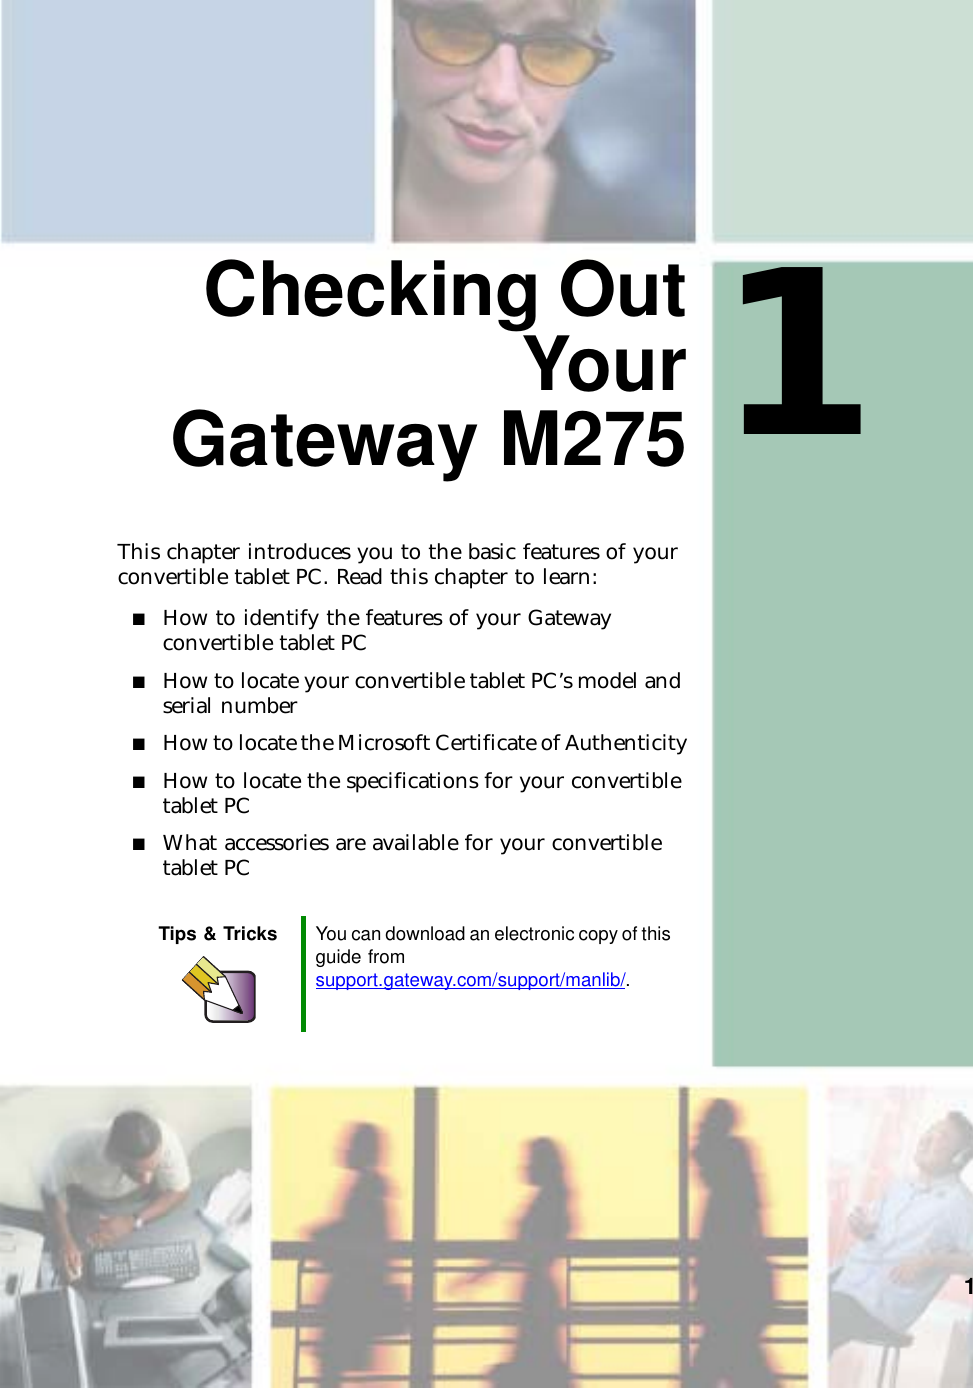 11Checking OutYourGateway M275This chapter introduces you to the basic features of your convertible tablet PC. Read this chapter to learn:■How to identify the features of your Gateway convertible tablet PC■How to locate your convertible tablet PC’s model and serial number■How to locate the Microsoft Certificate of Authenticity■How to locate the specifications for your convertible tablet PC■What accessories are available for your convertible tablet PCTips &amp; Tricks You can download an electronic copy of this guide from support.gateway.com/support/manlib/.